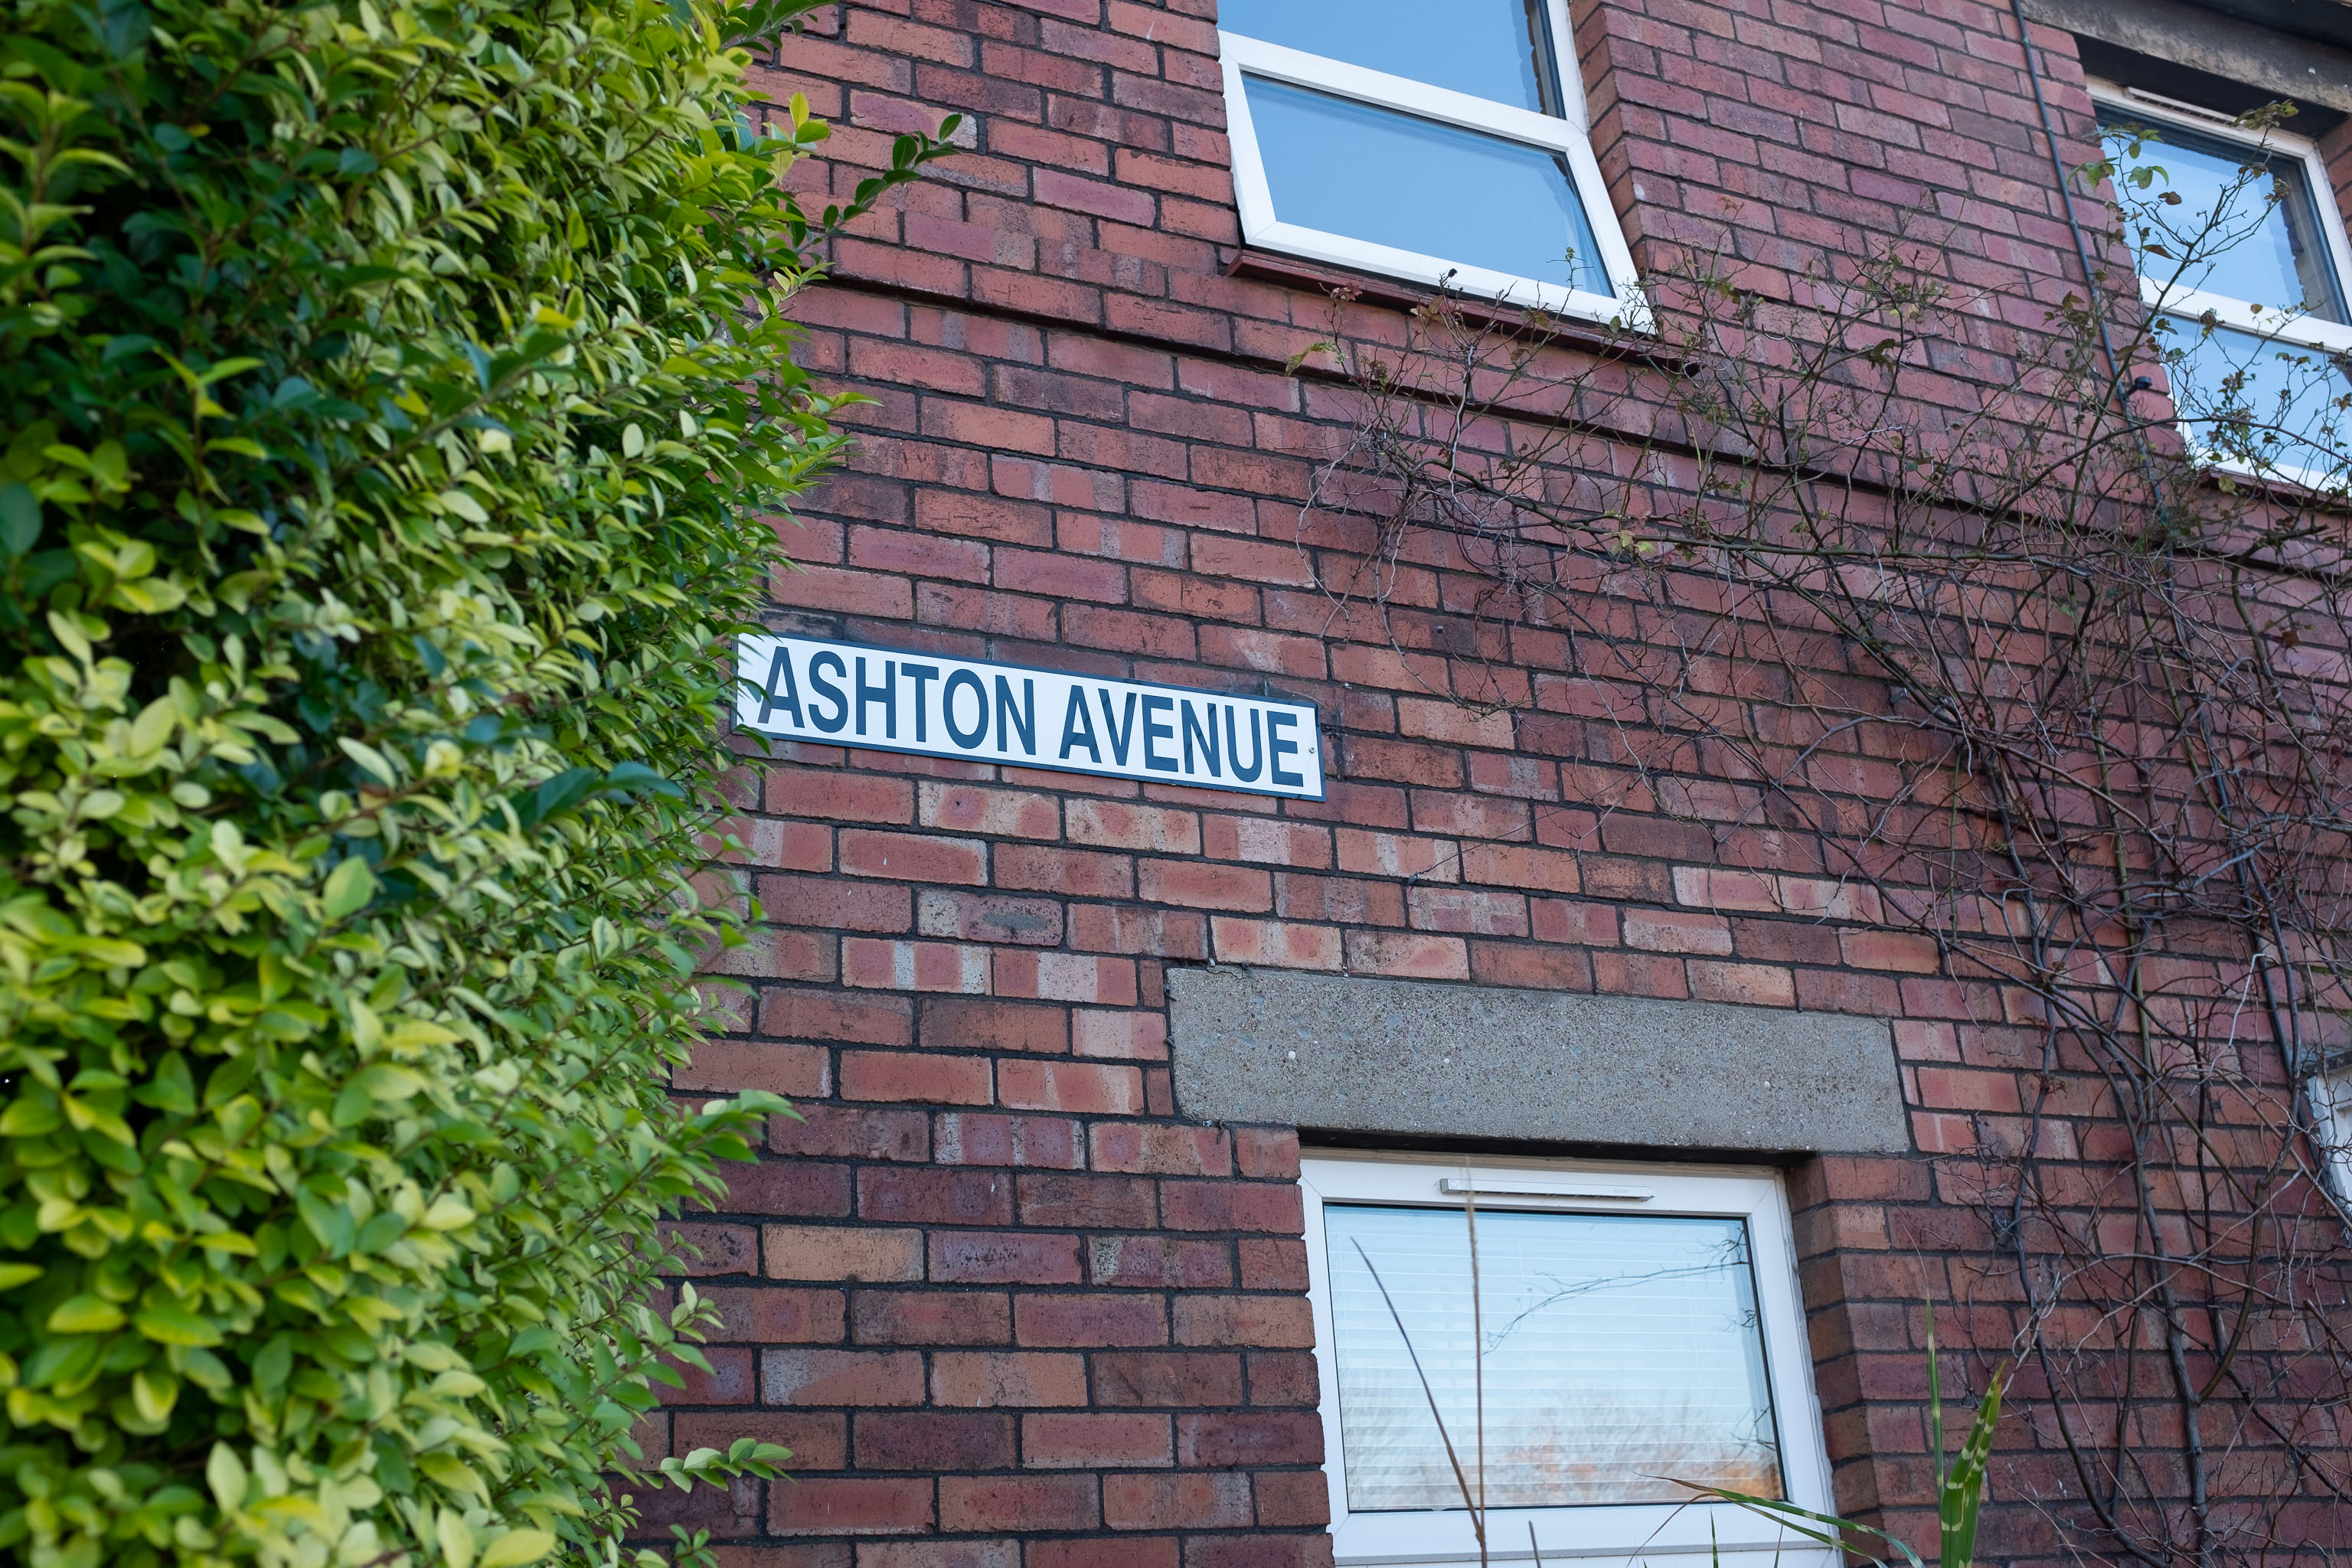 Sign
I'm not sure I ever realised there was still and Ashton Avenue to go with Ashton Avenue Bridge.
